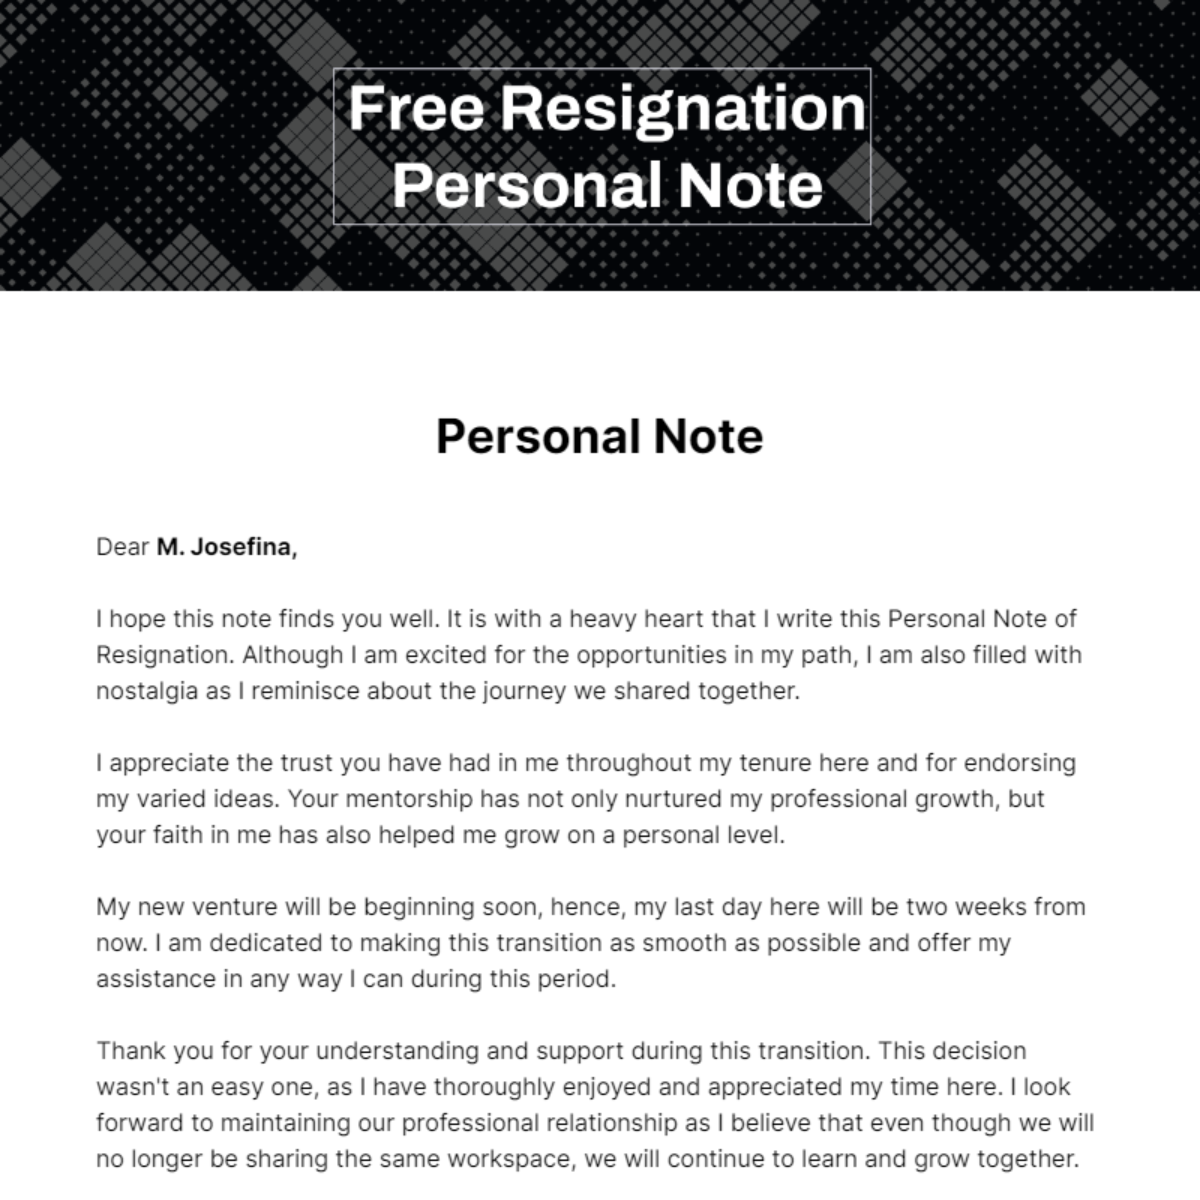 Resignation Personal Note Template